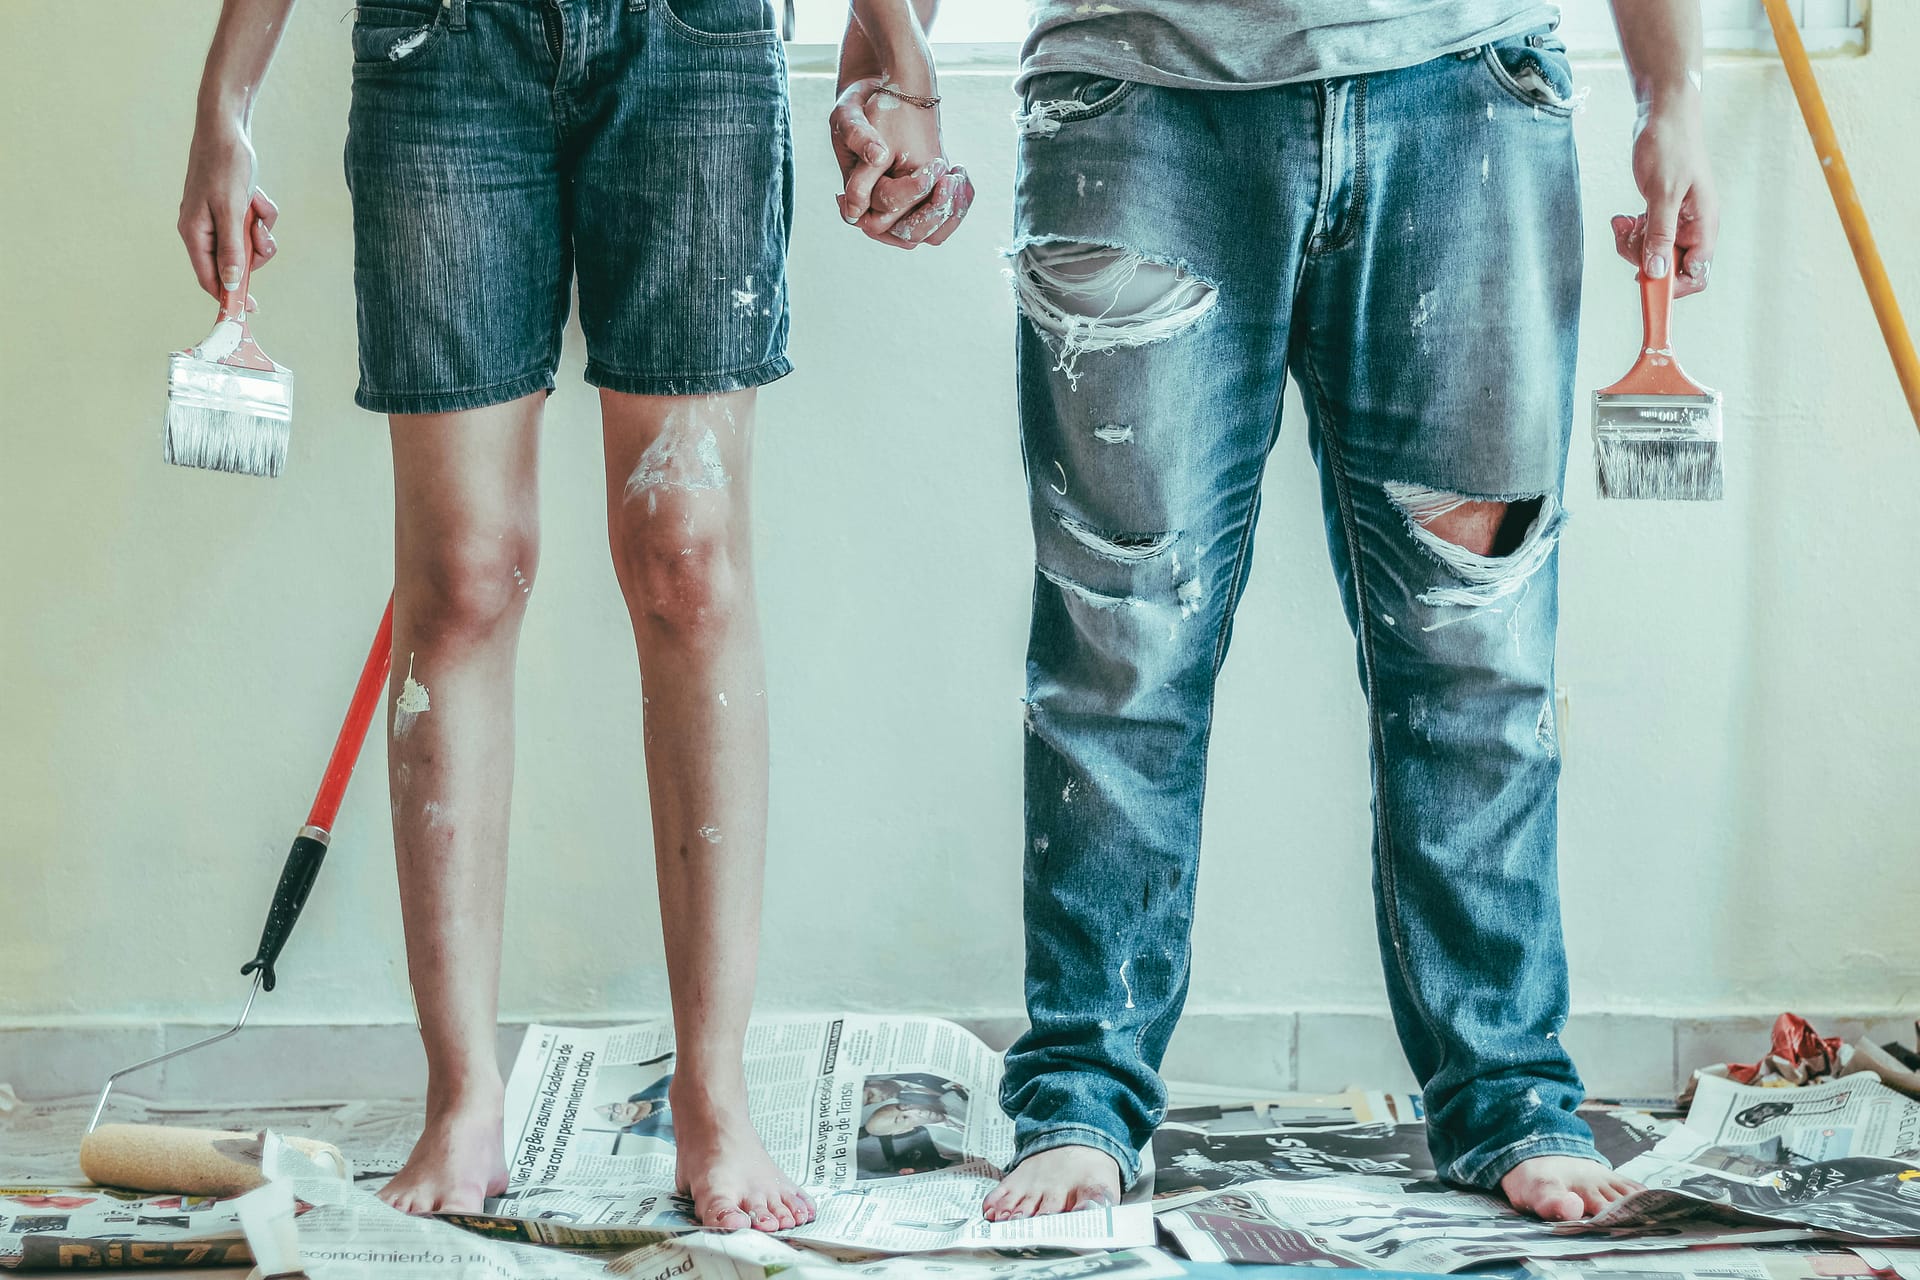 Couple midway through a property renovation, dressed in work clothes covered in paint and plaster.